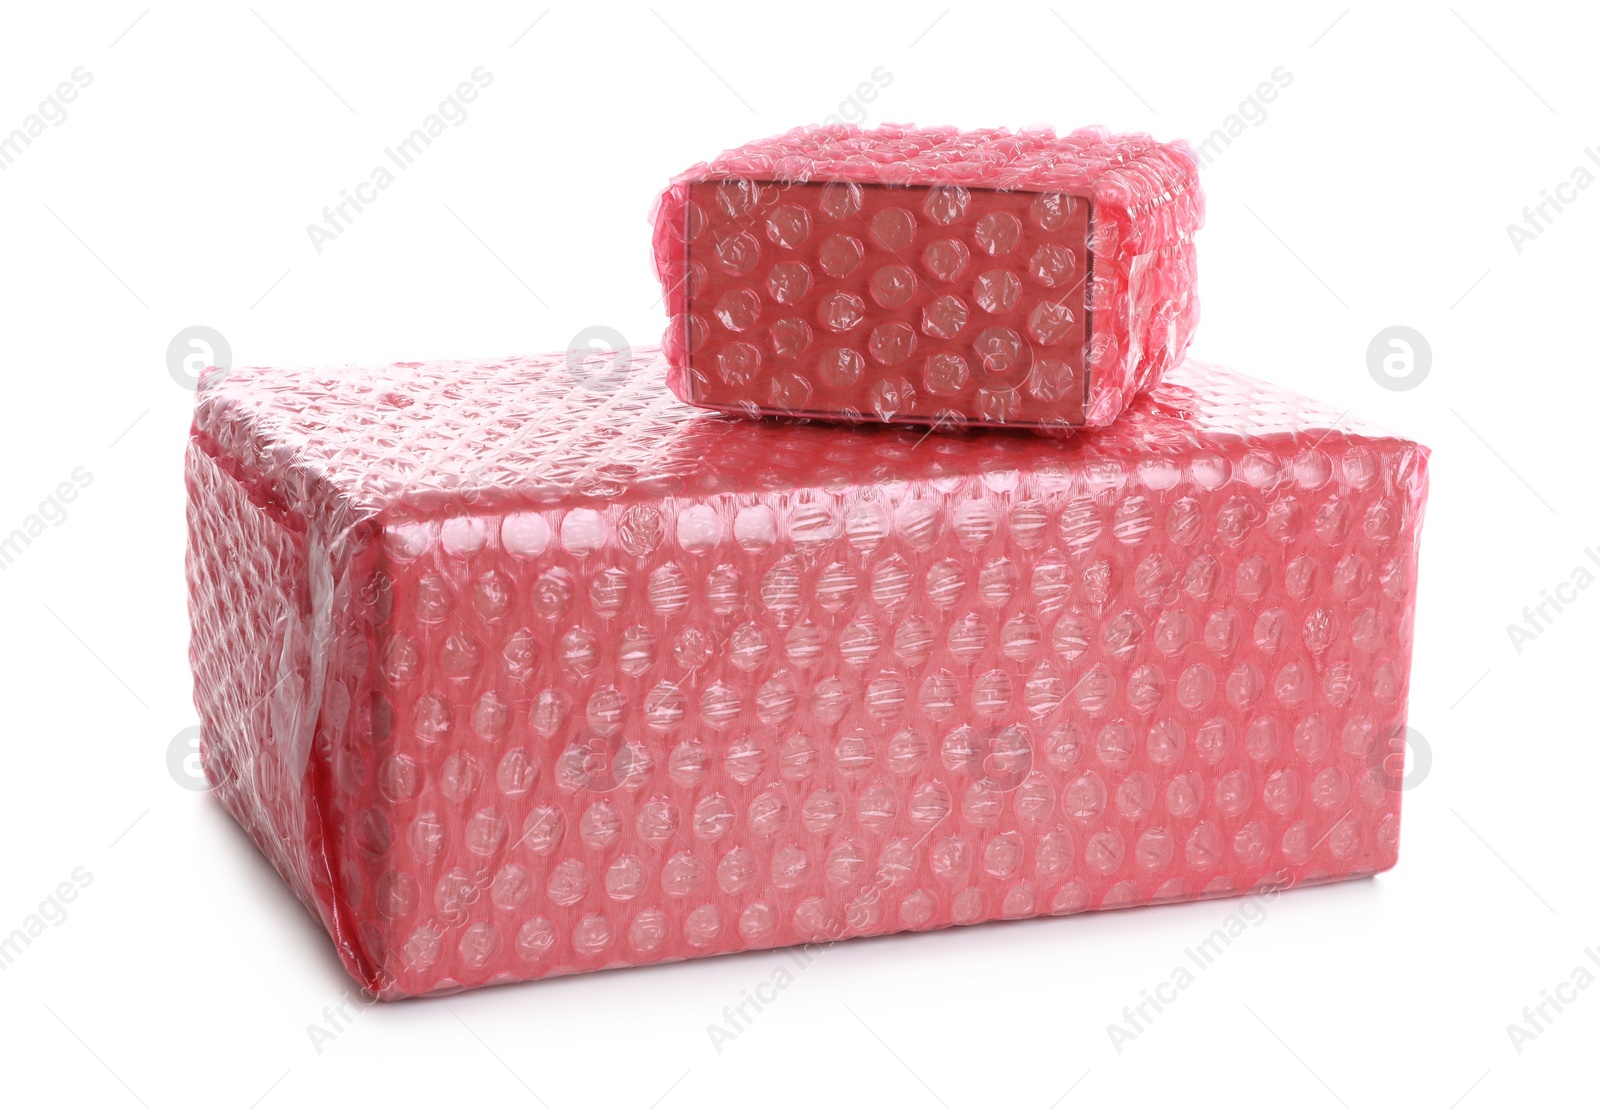 Photo of Cardboard boxes packed in red bubble wrap on white background